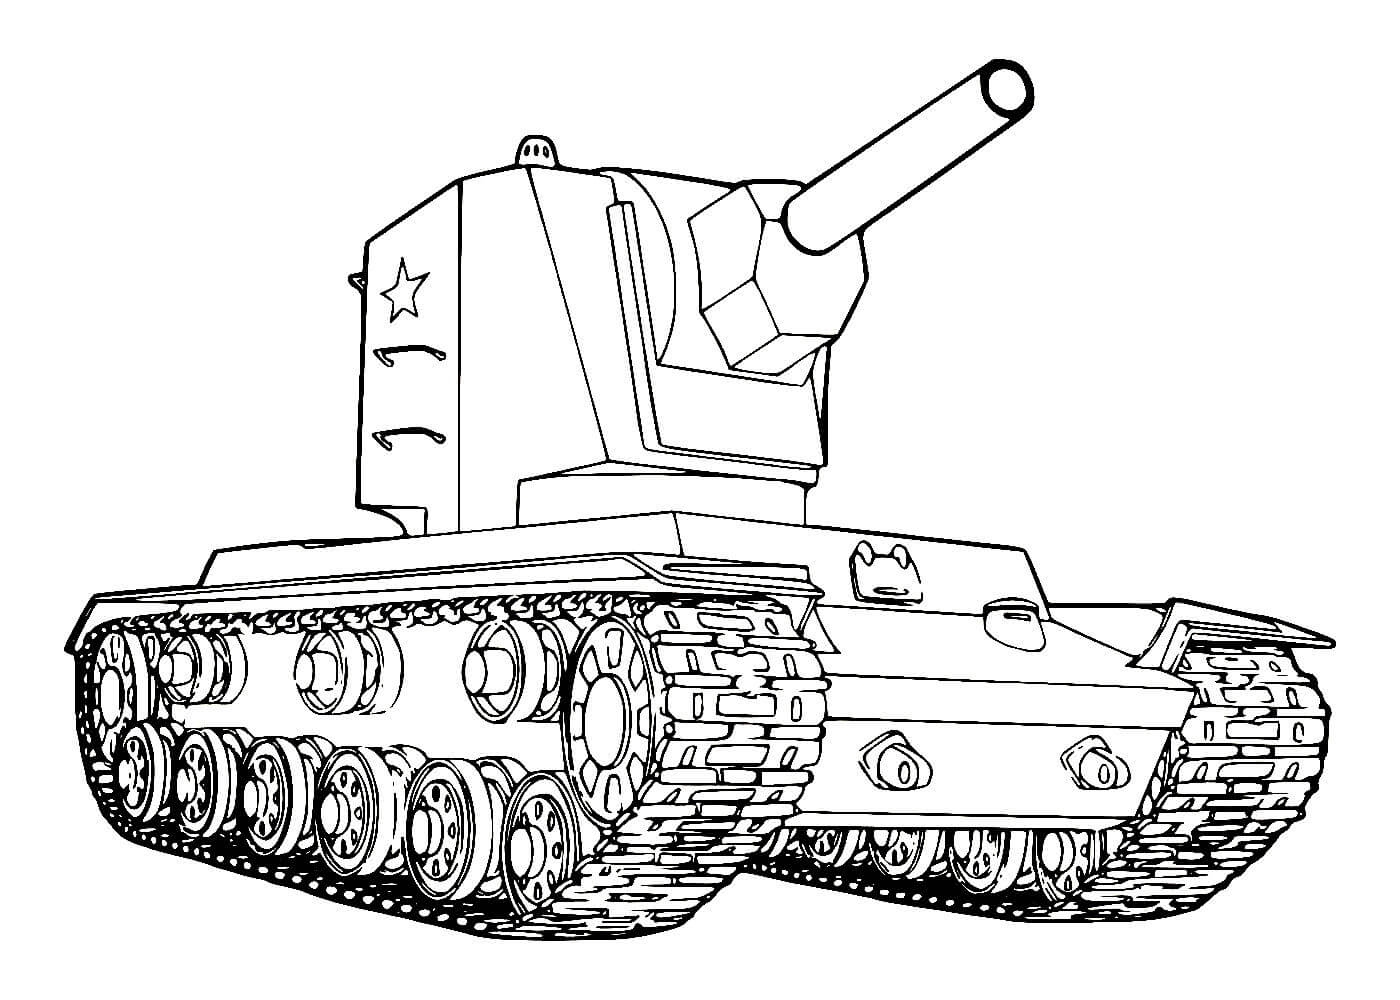 Coloring book grand tank for children 4-5 years old